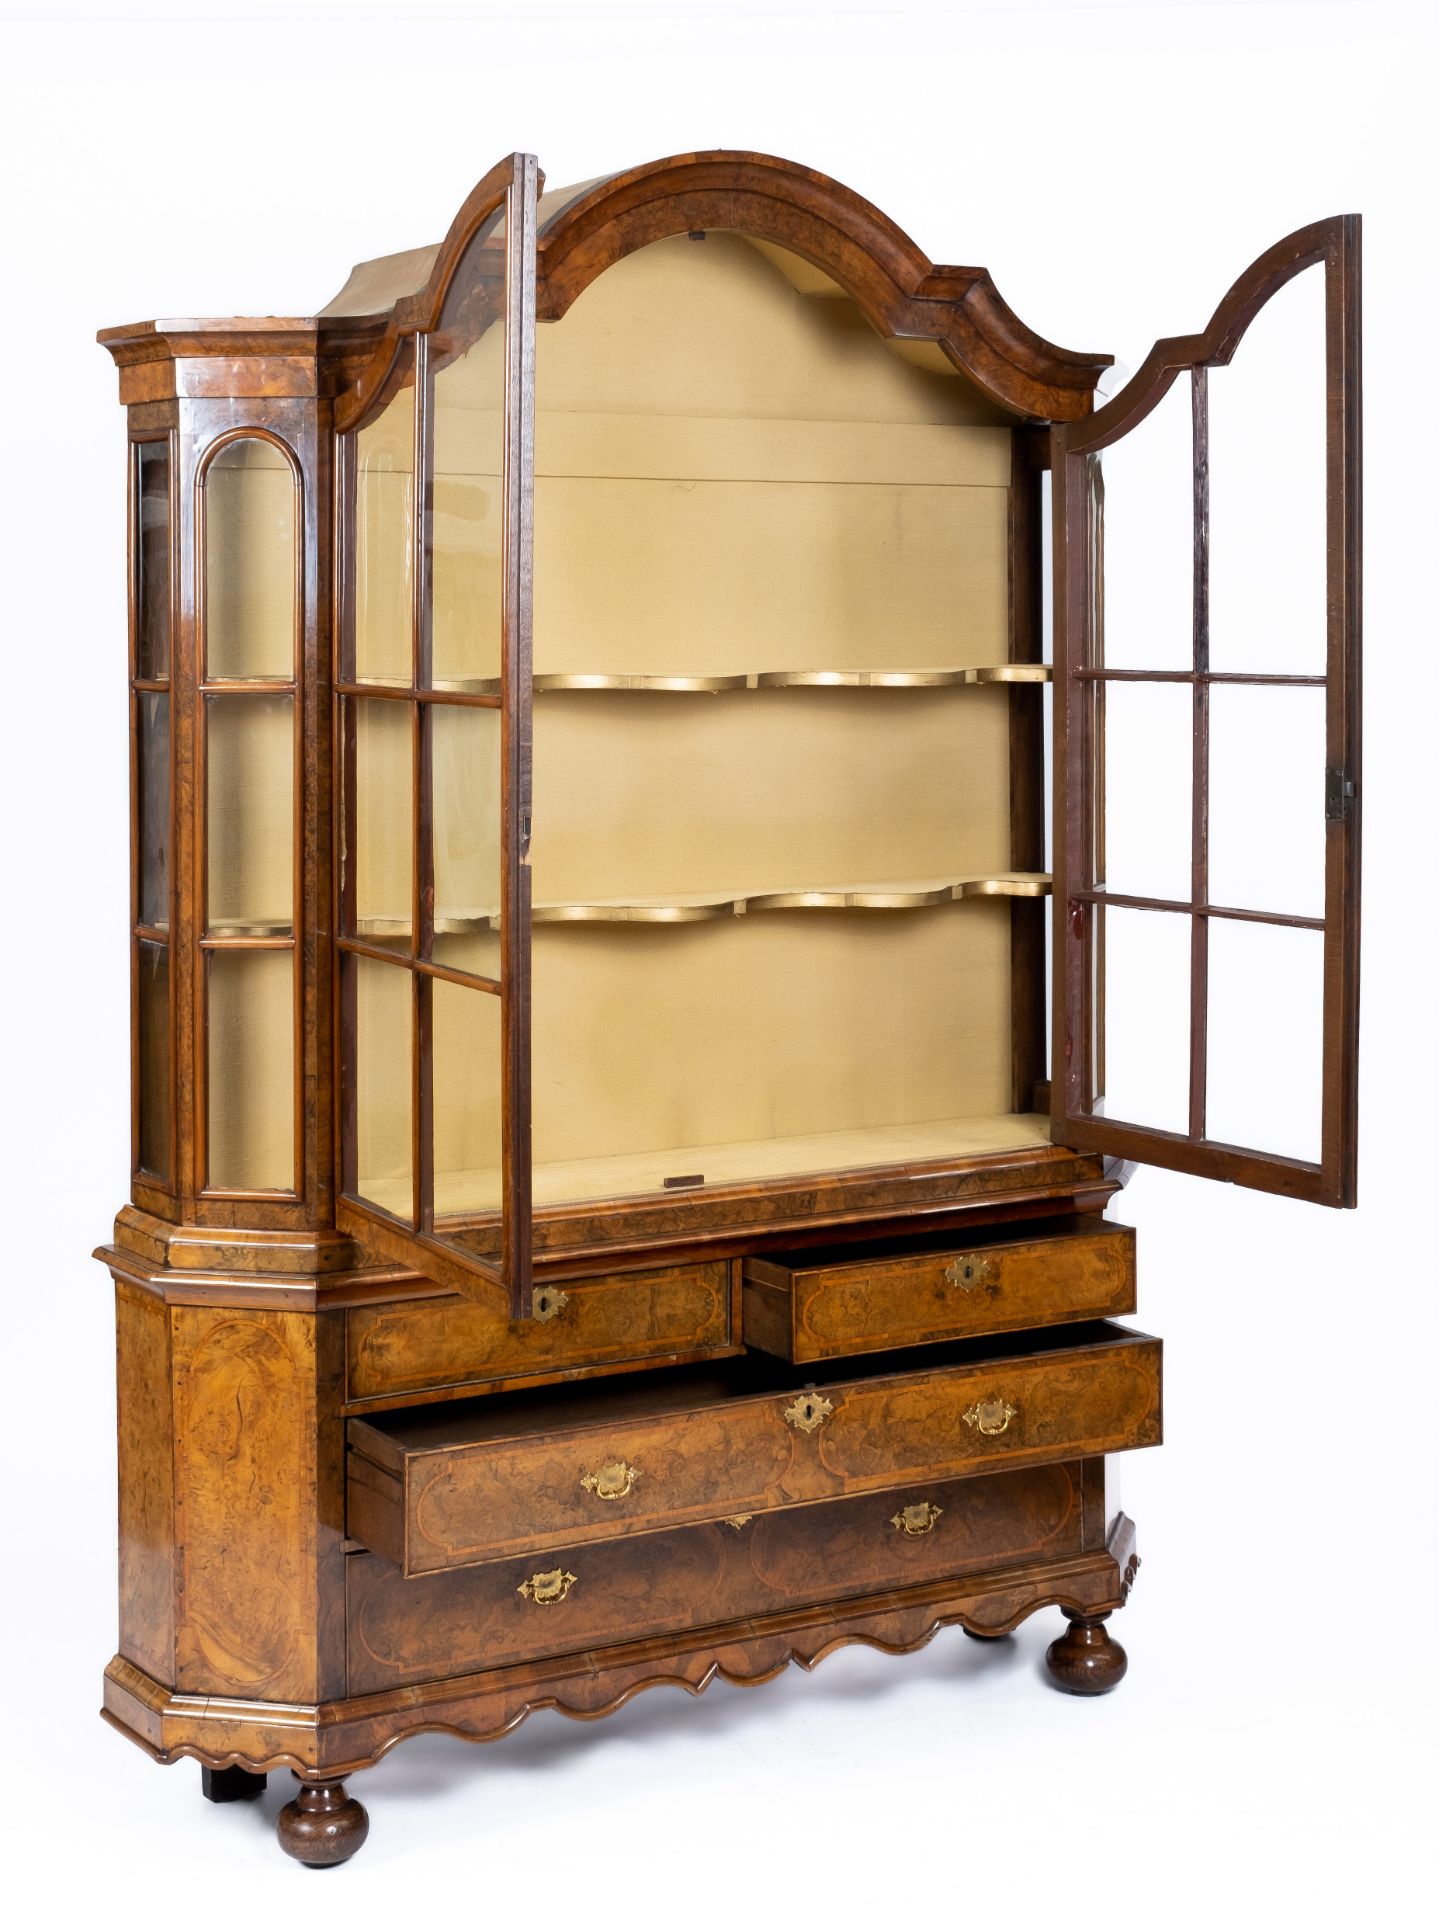 A Dutch brass-mounted figured walnut and elm inlaid display cabinet - Image 3 of 3